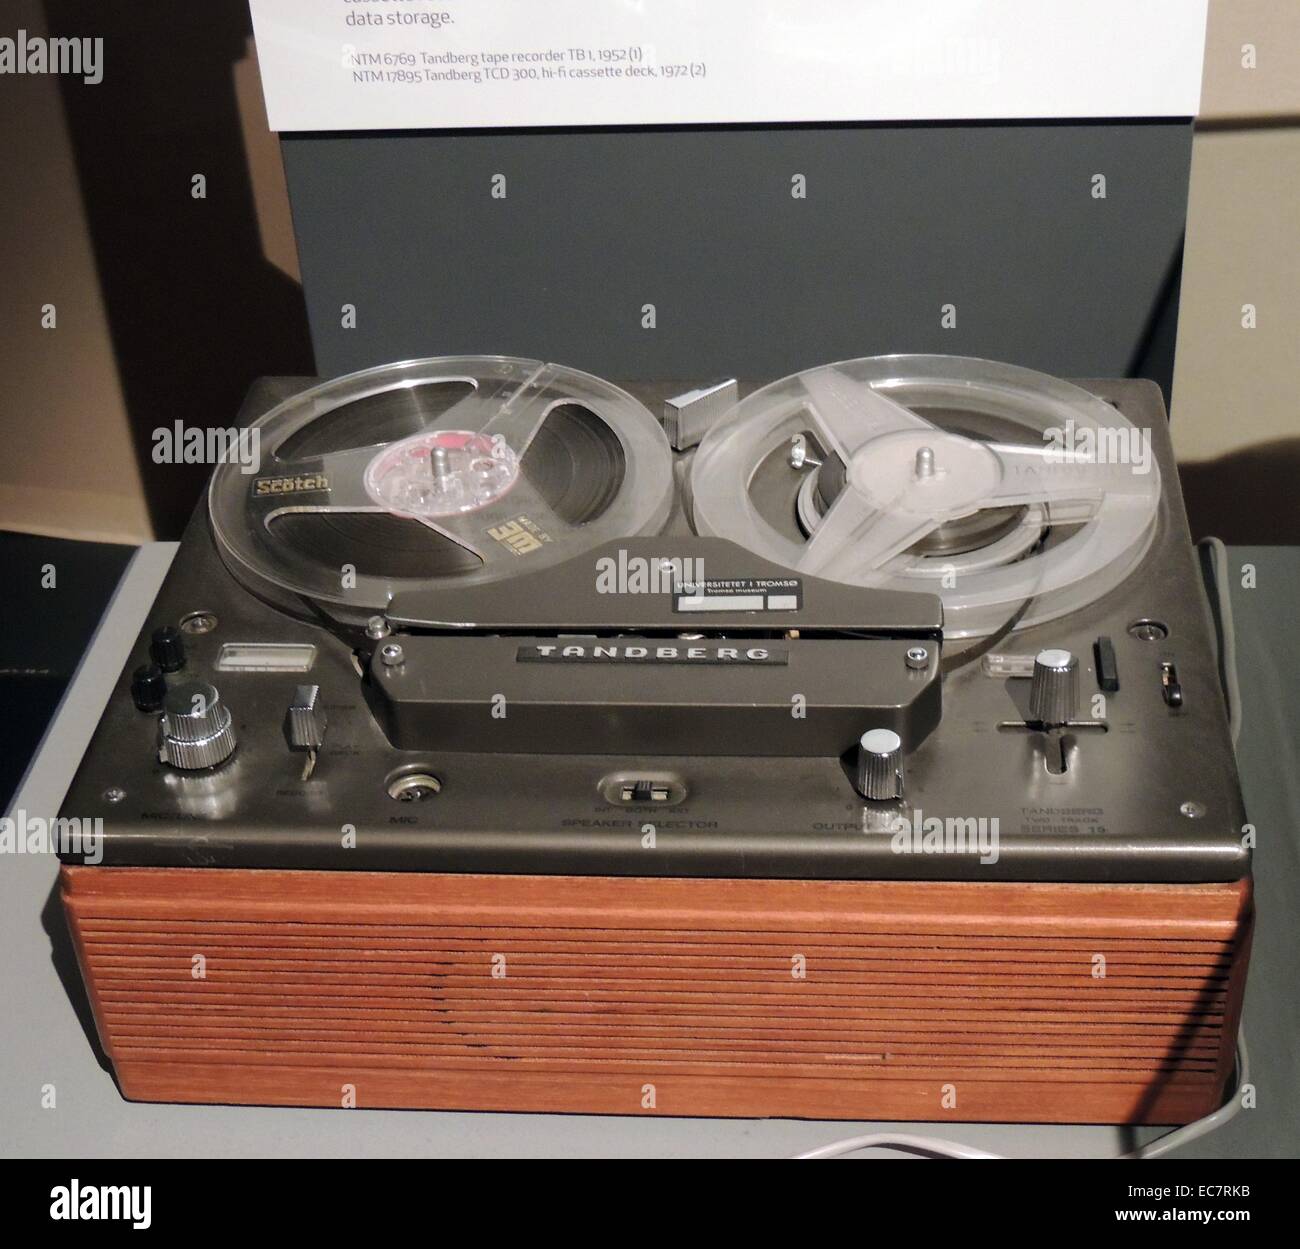 Tandberg's Radiofabrikk in Oslo launched their TB 1 tape recorder in 1952.  This Norwegian radio manufacturer